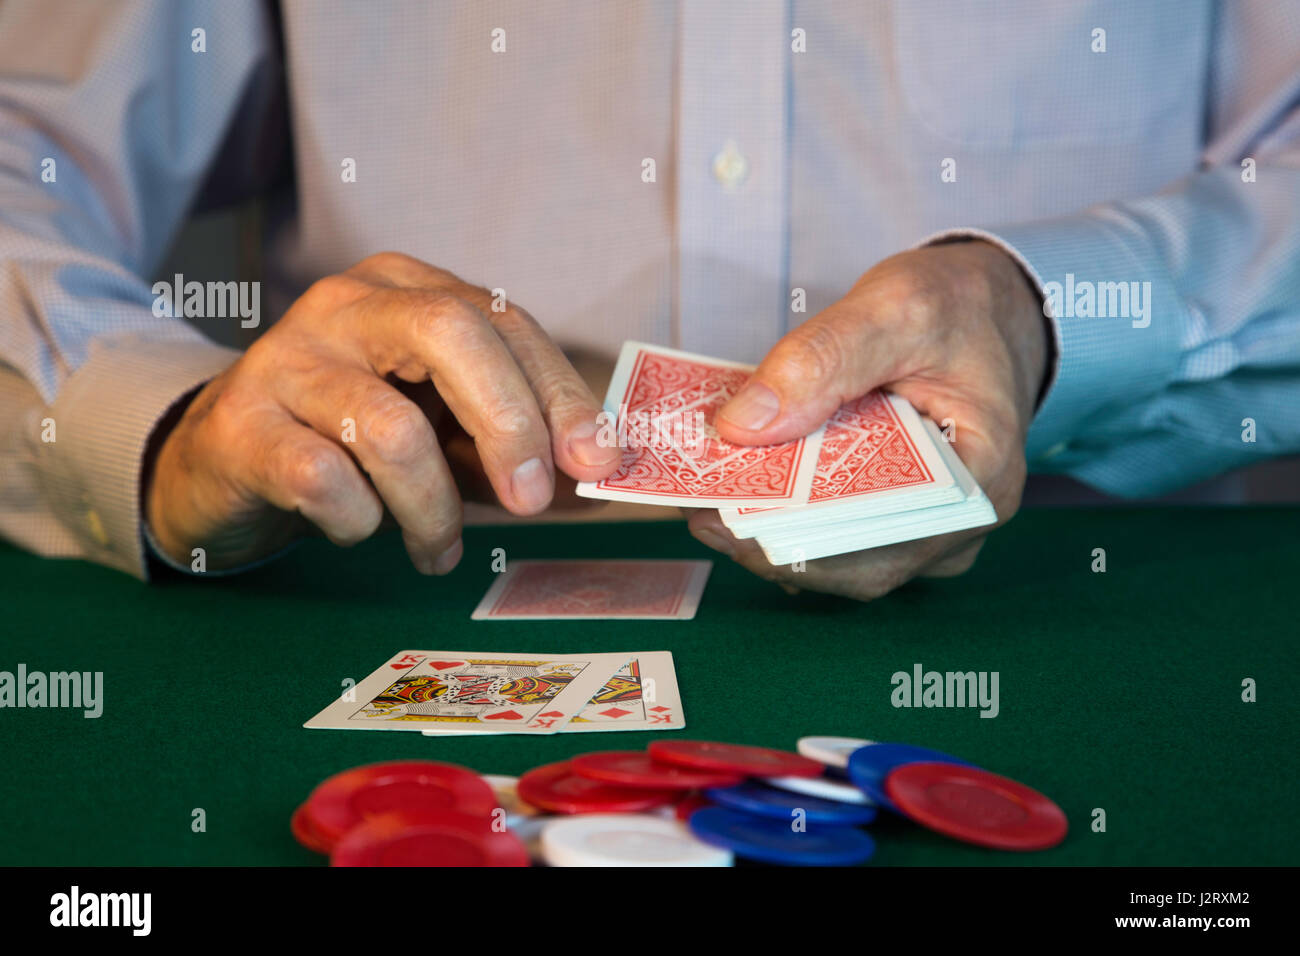 Man Dealing Cards for Poker Game Stock Photo